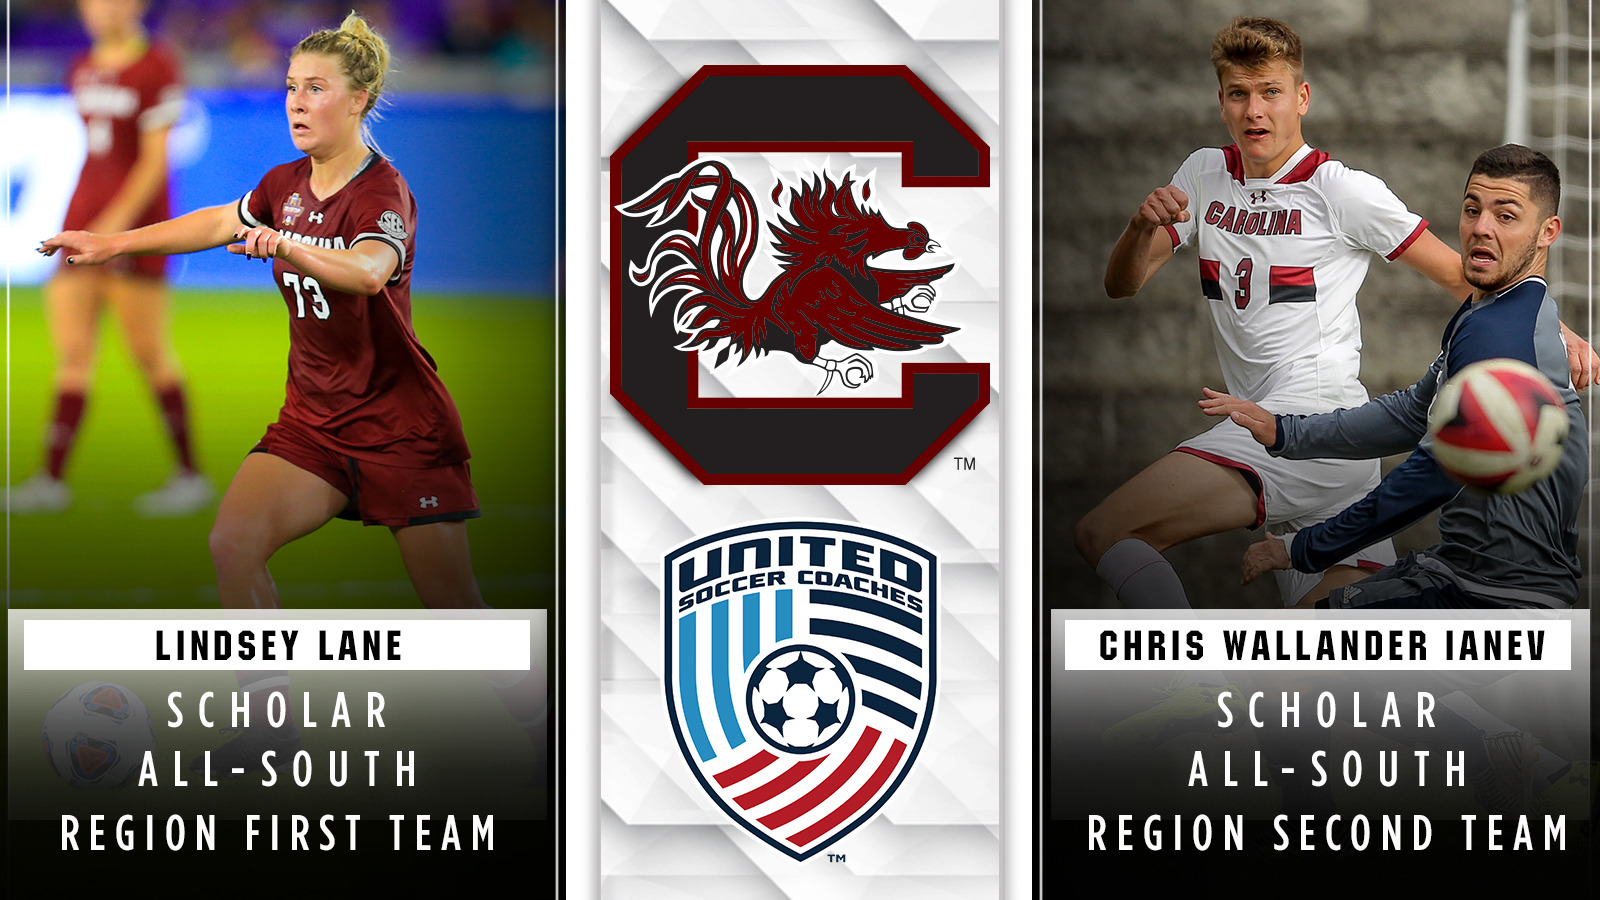 Two Gamecocks Earn Academic Honor From United Soccer Coaches